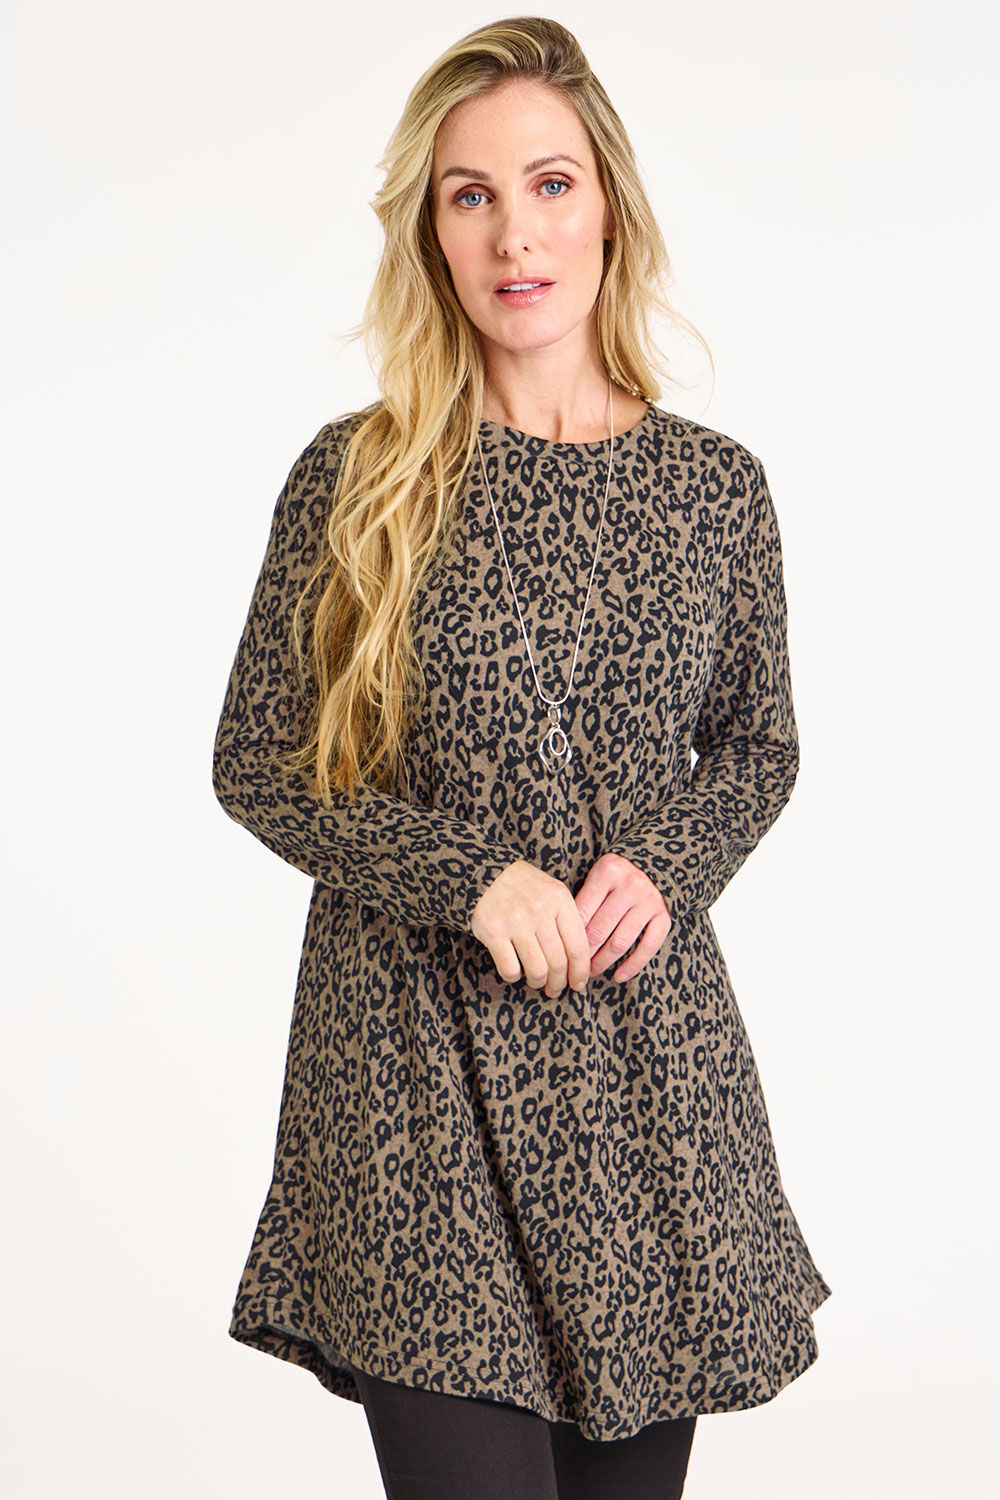 Bonmarche Women’s Brown and Black Animal Print Soft Touch Tunic Dress, Size: S